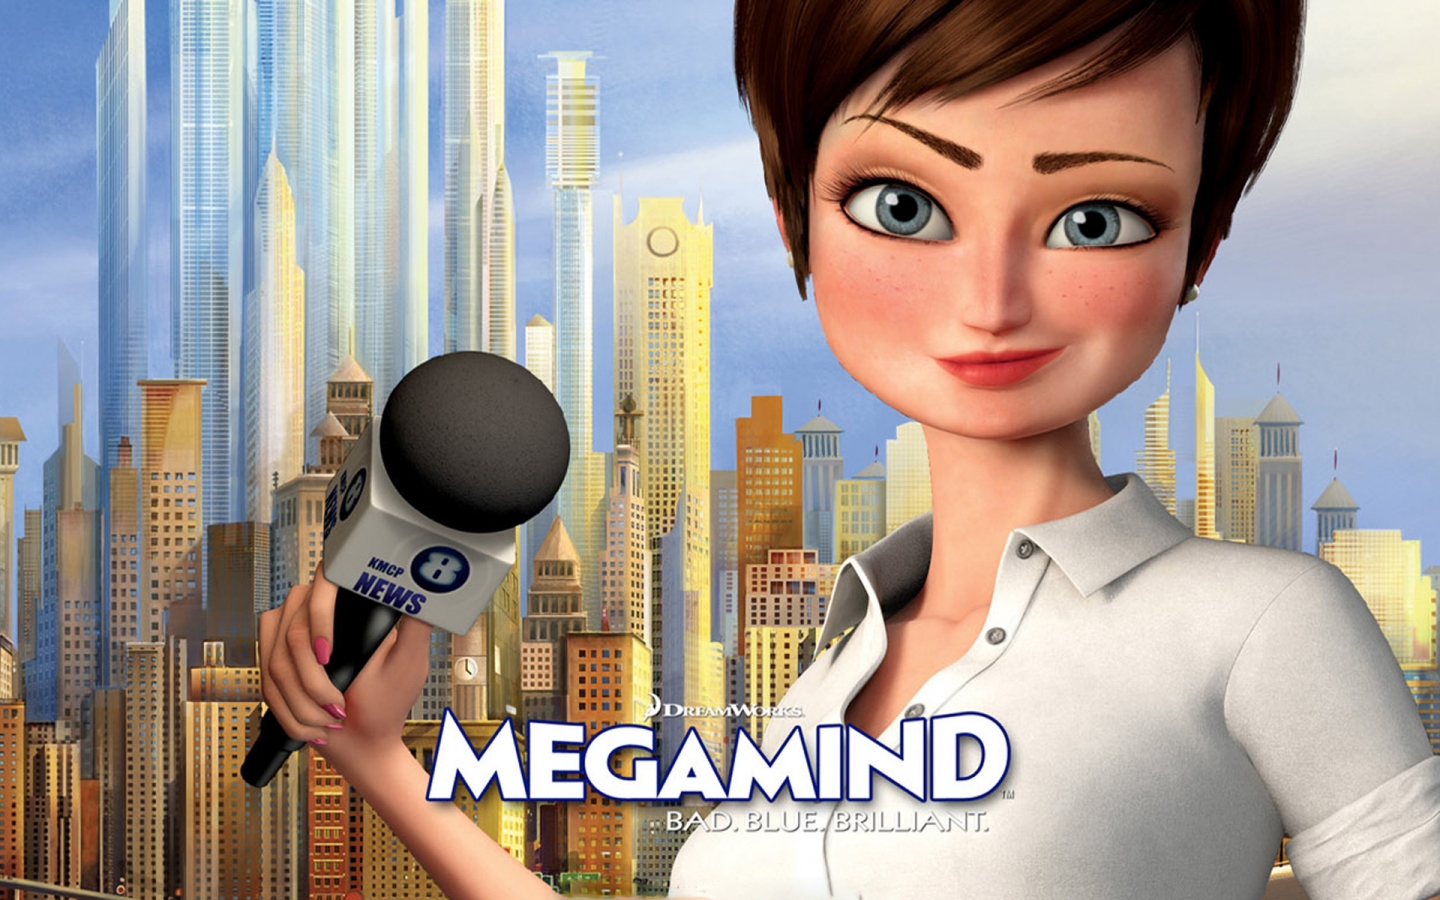 Megamind Roxanne Ritchie for 1440 x 900 widescreen resolution